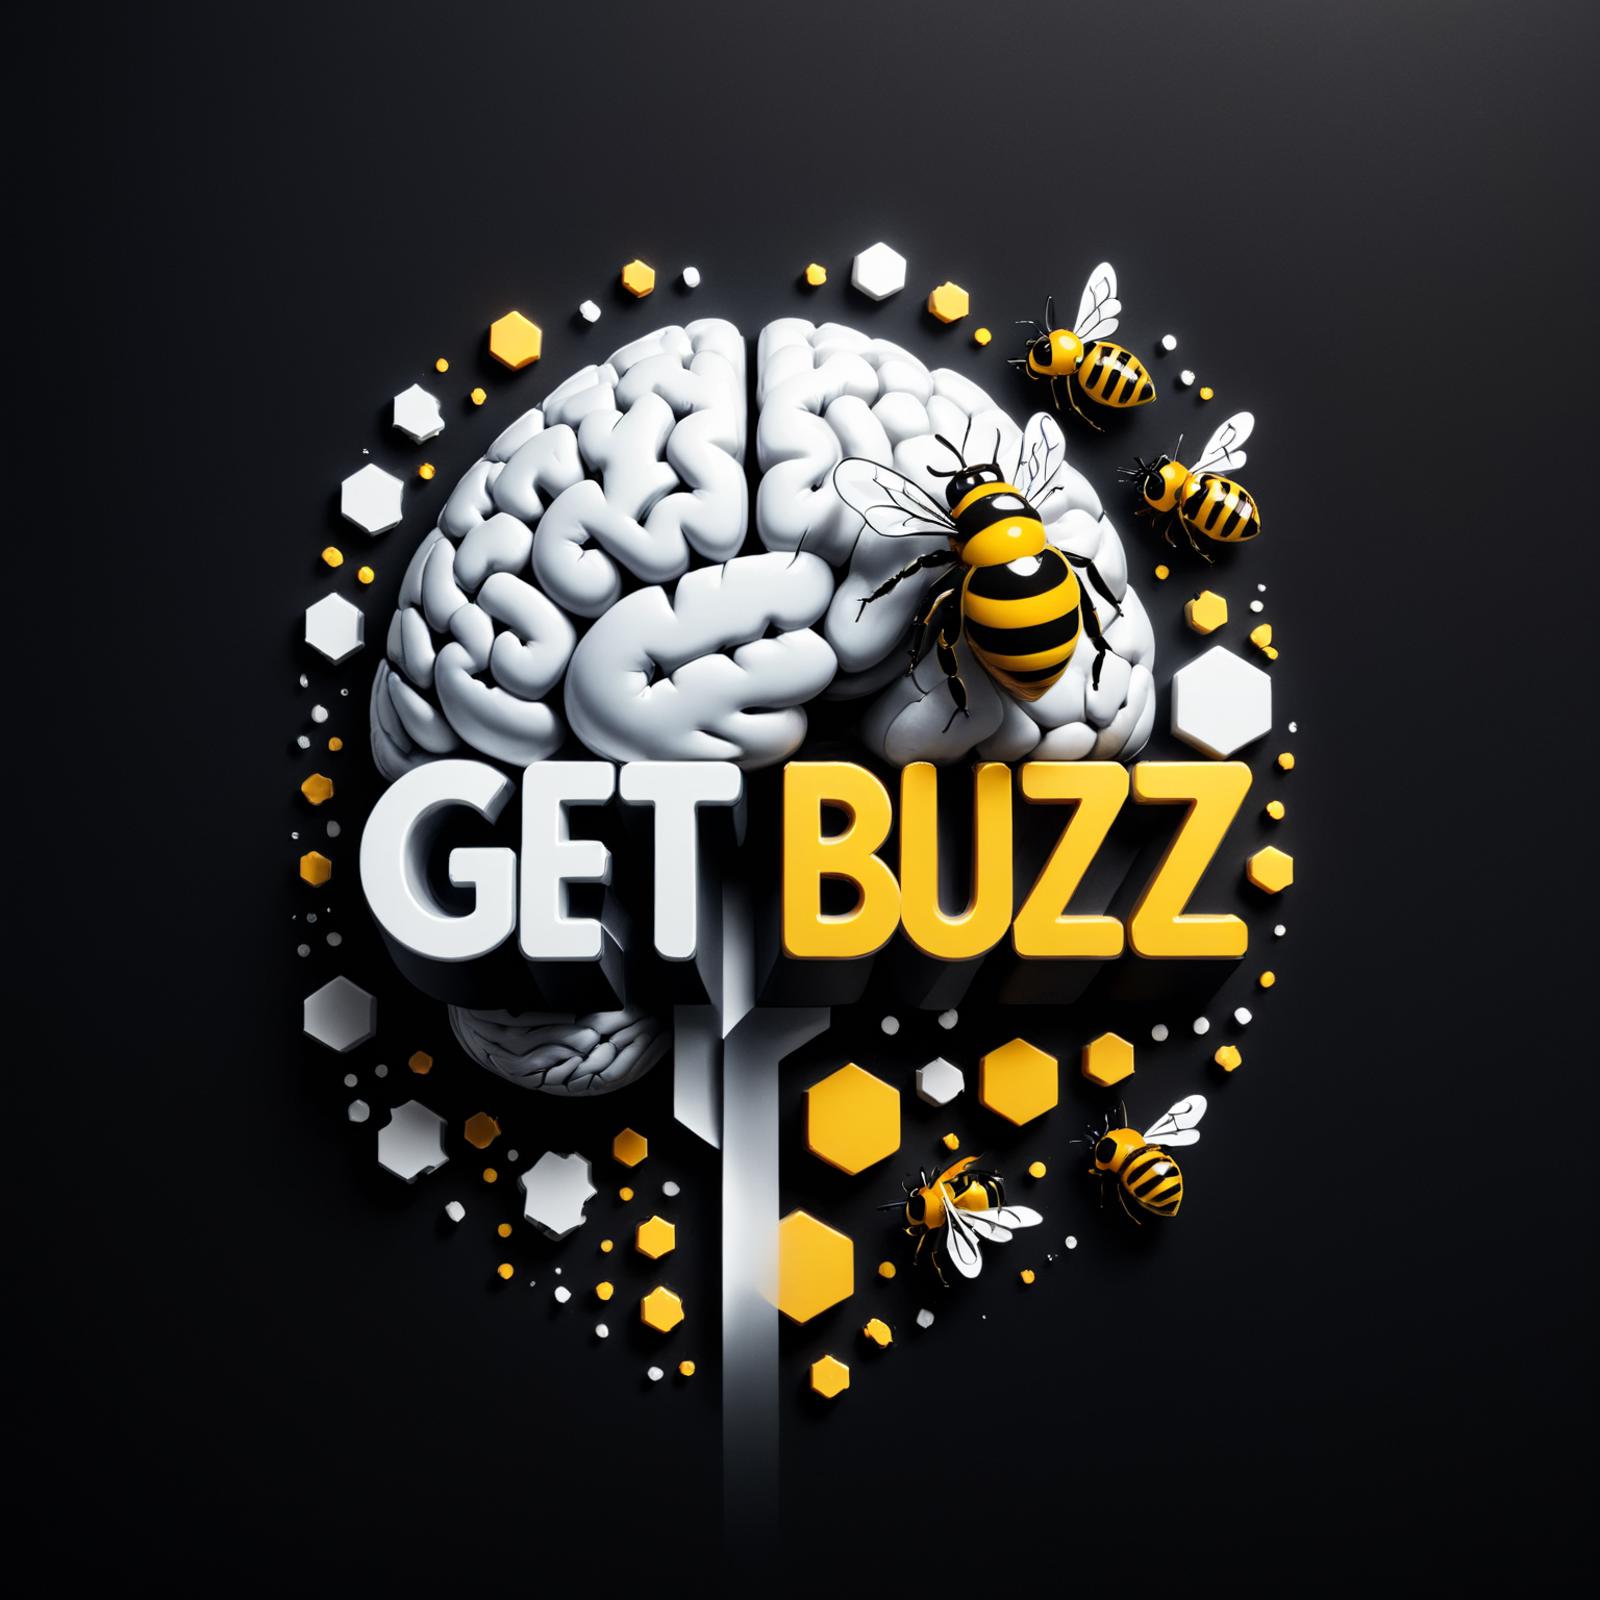 A graphic design featuring a bee and a brain with the words "Get Buzzed" written in white.